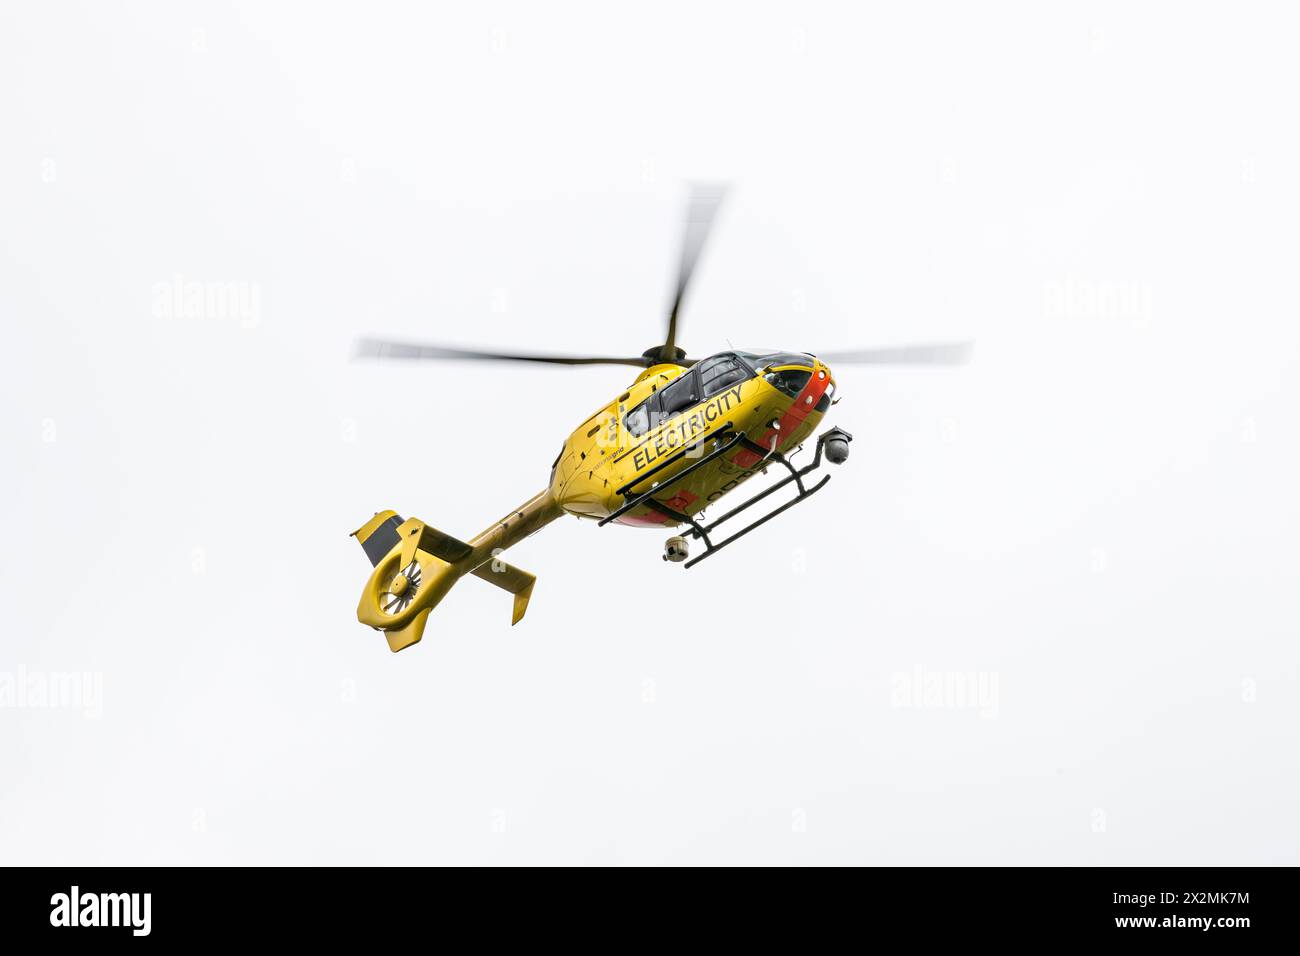 A National Grid EC-135 helicopter fitted with Trakkacam aerial surveillance cameras for monitoring power lines (UK) Stock Photo